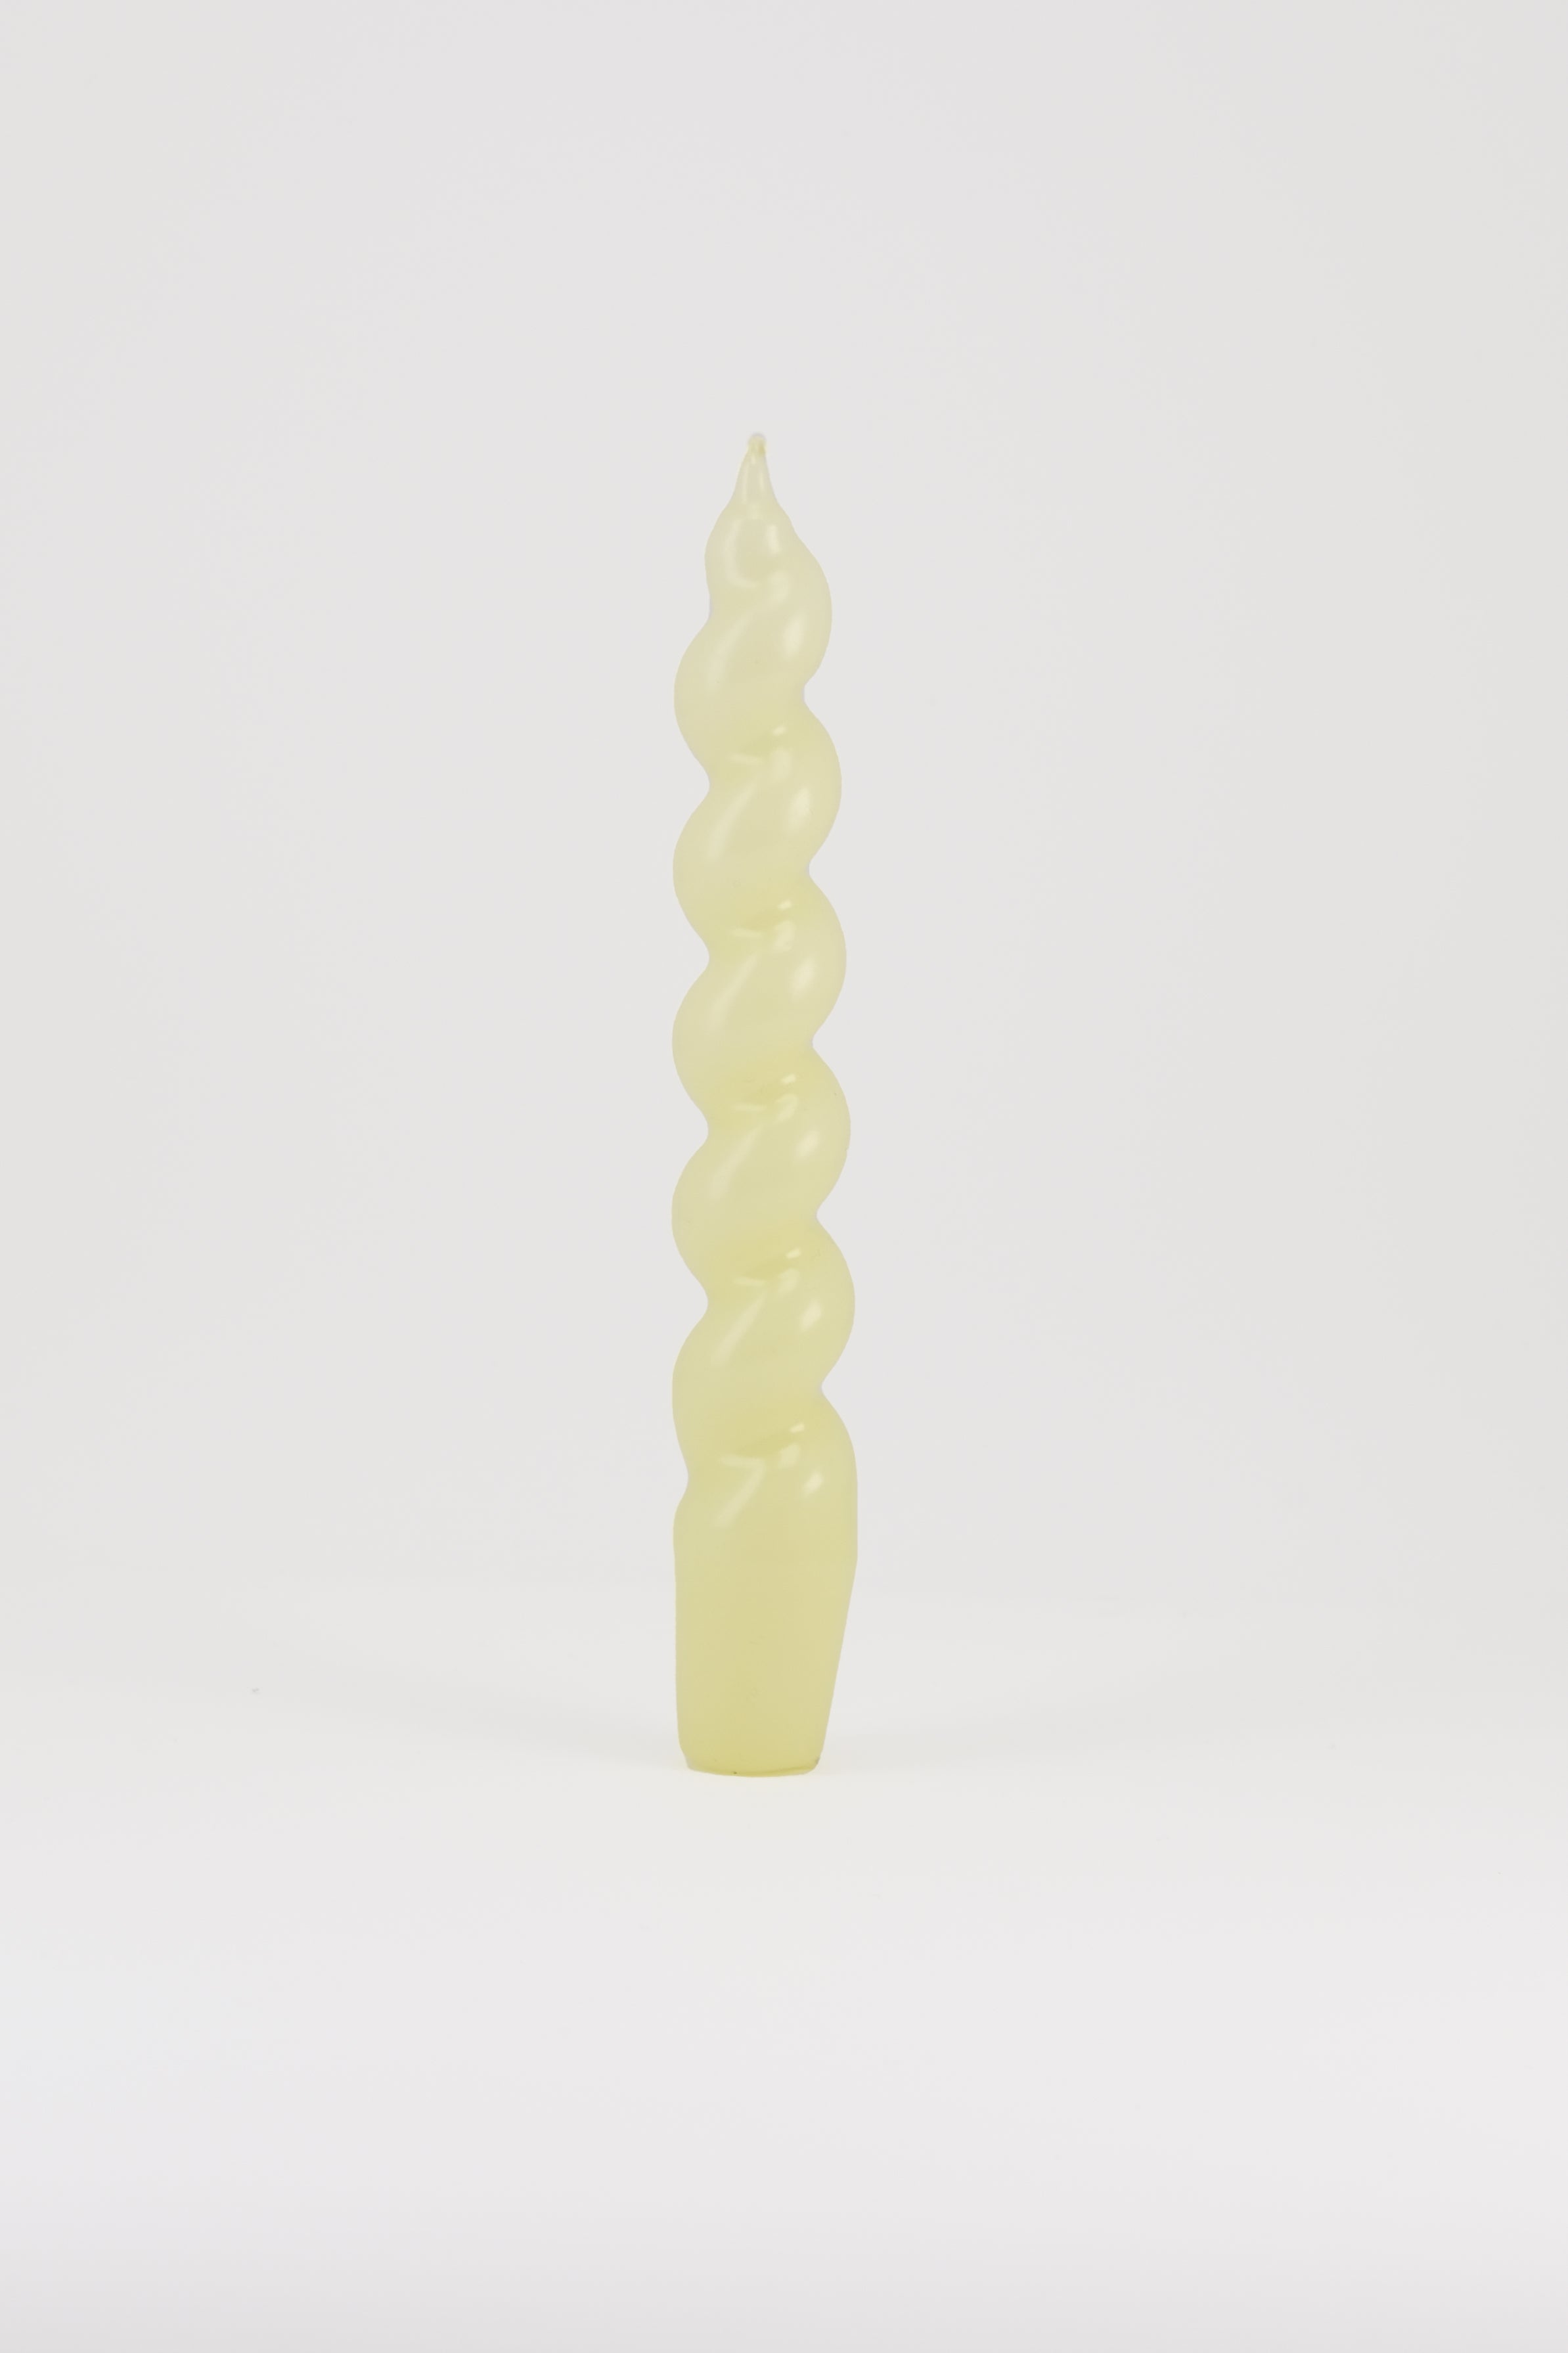 2 x spiral candle light yellow-Cereria-KIOSK48TH